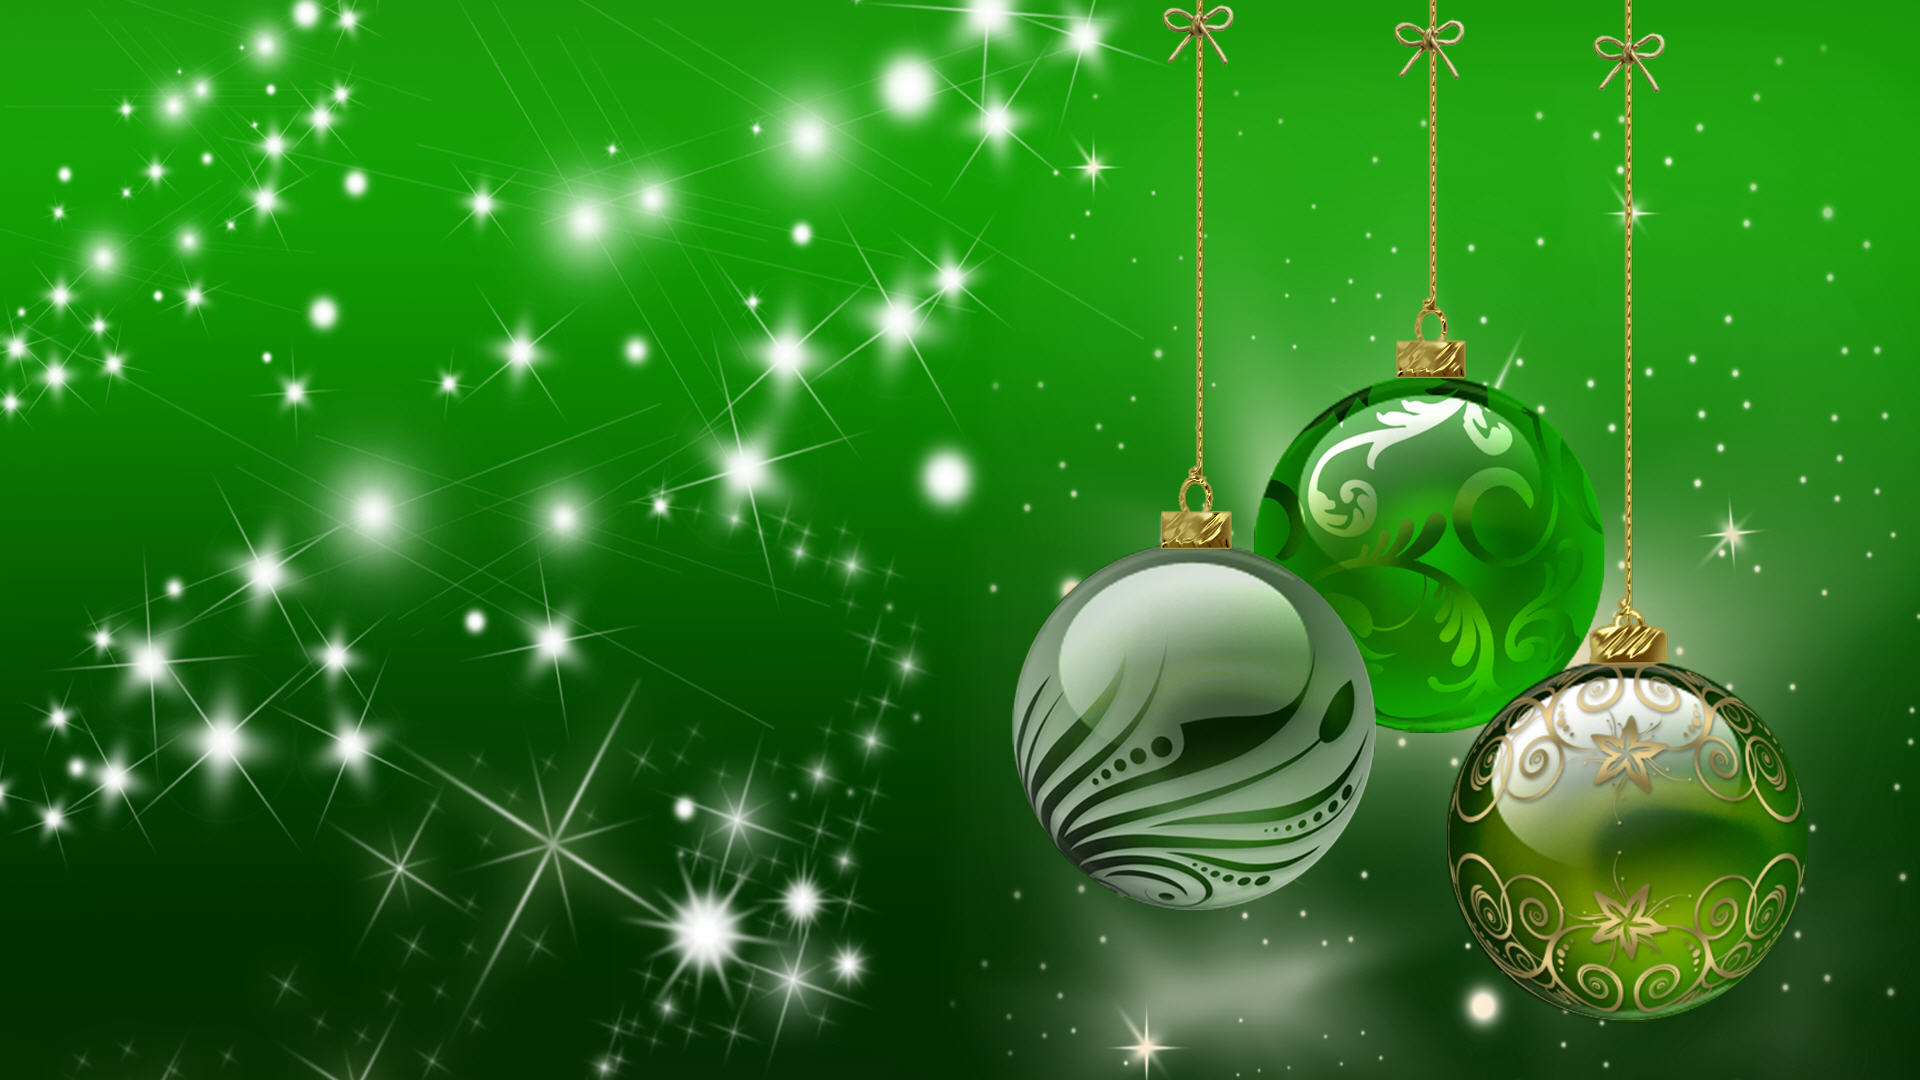 Holiday Image Free Download - Christmas Green Background Hd , HD Wallpaper & Backgrounds